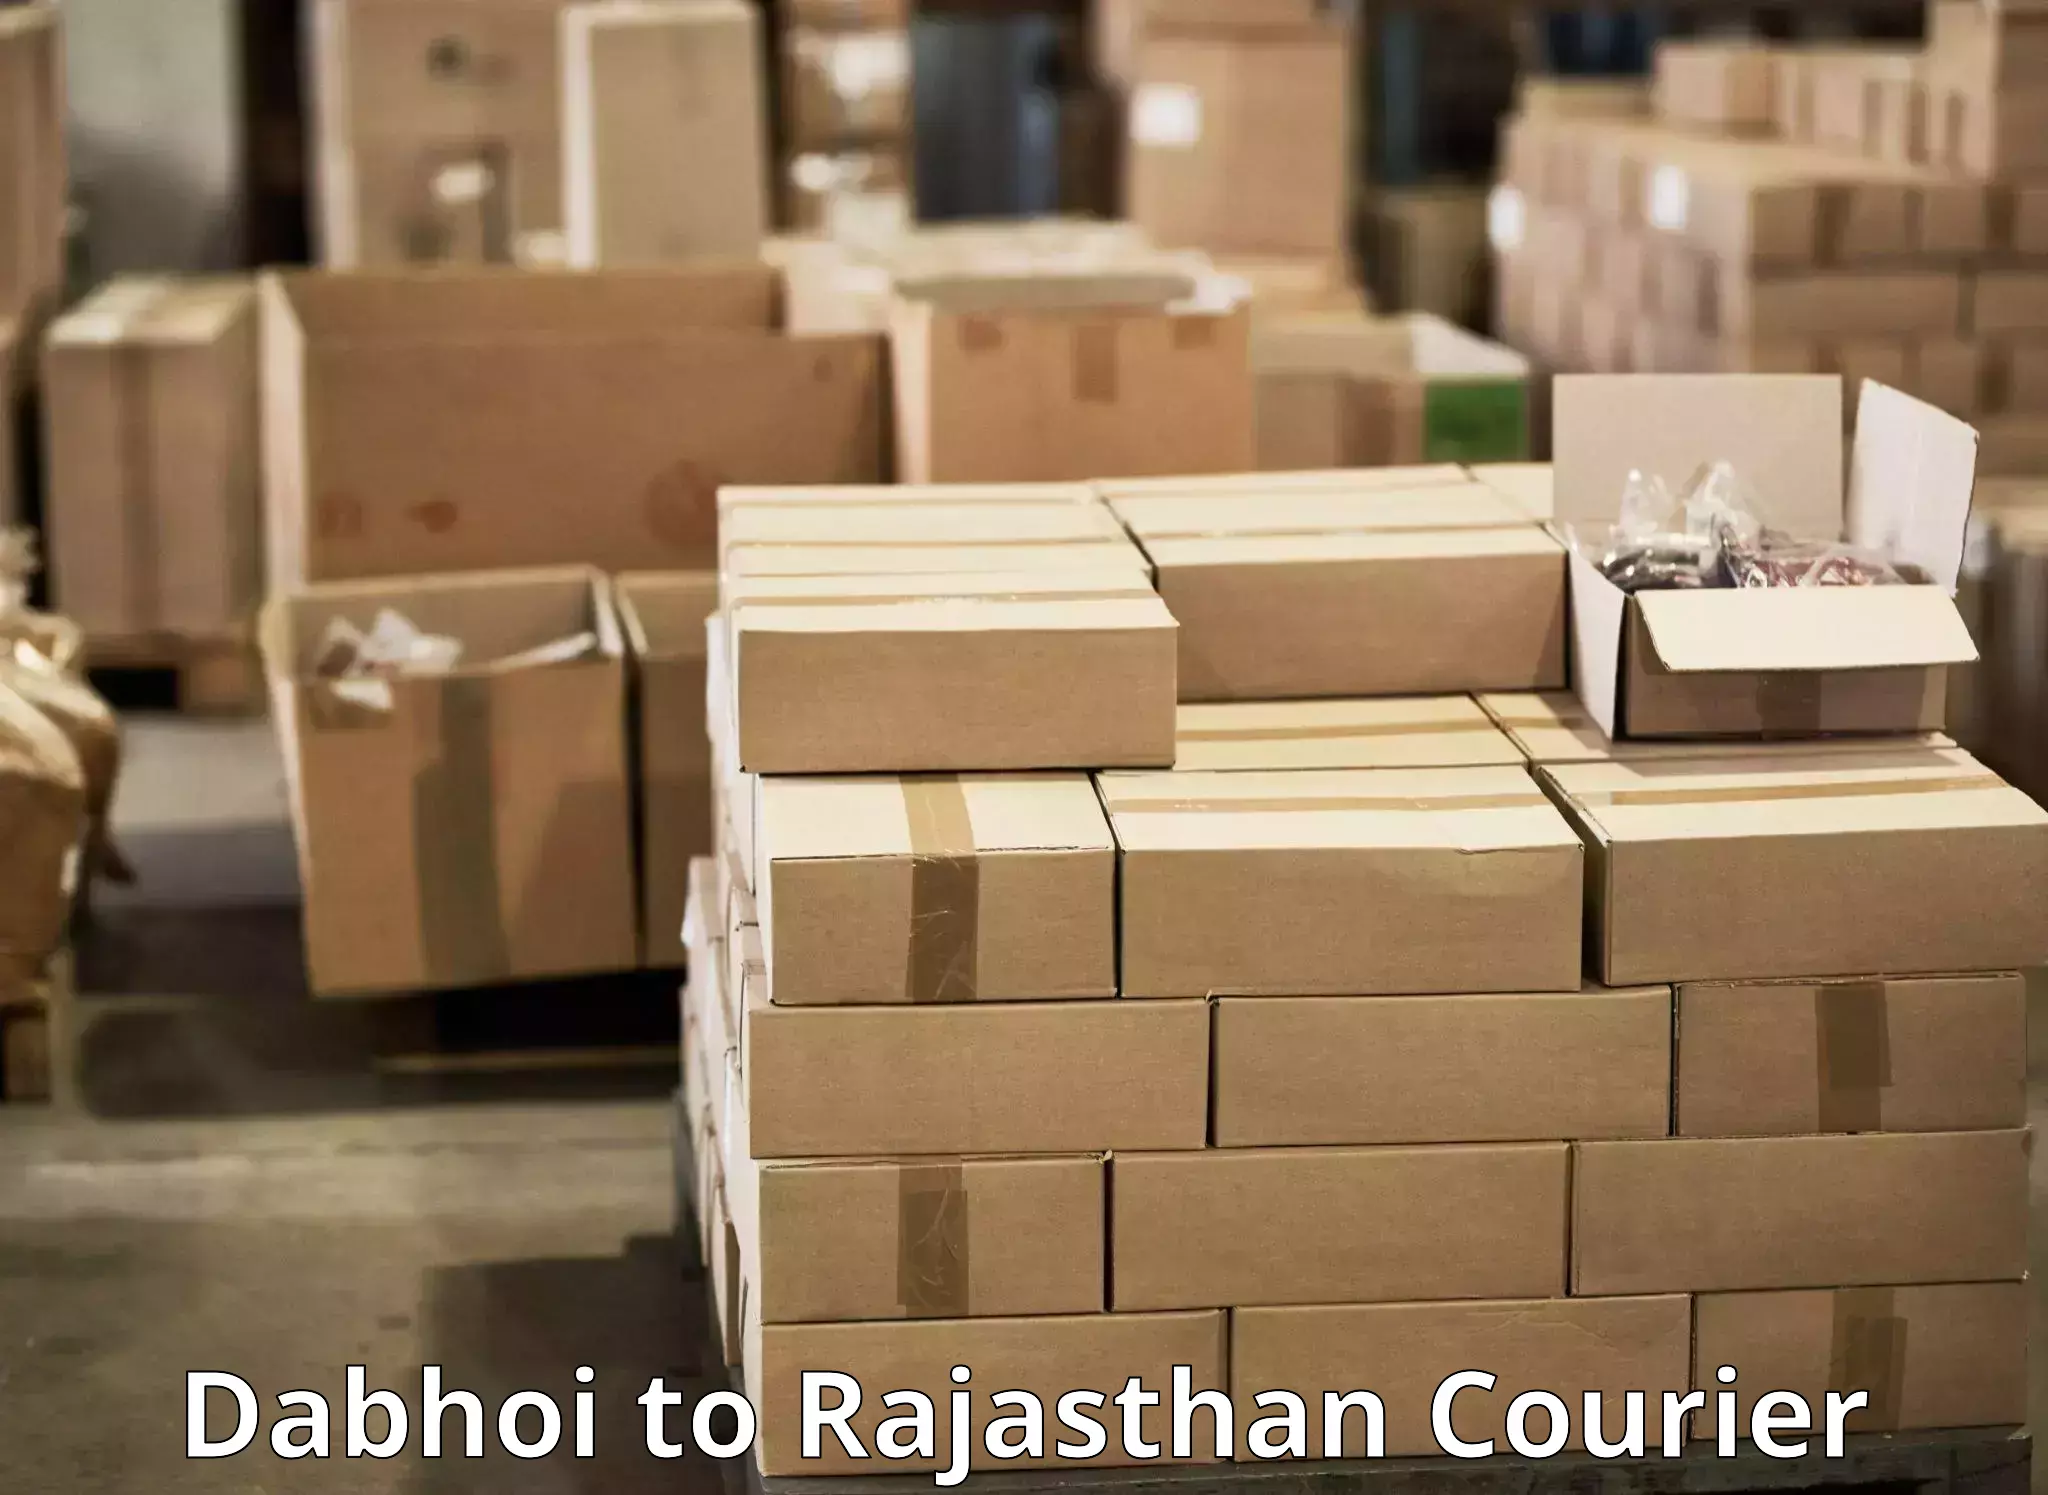 Local delivery service Dabhoi to Rajasthan